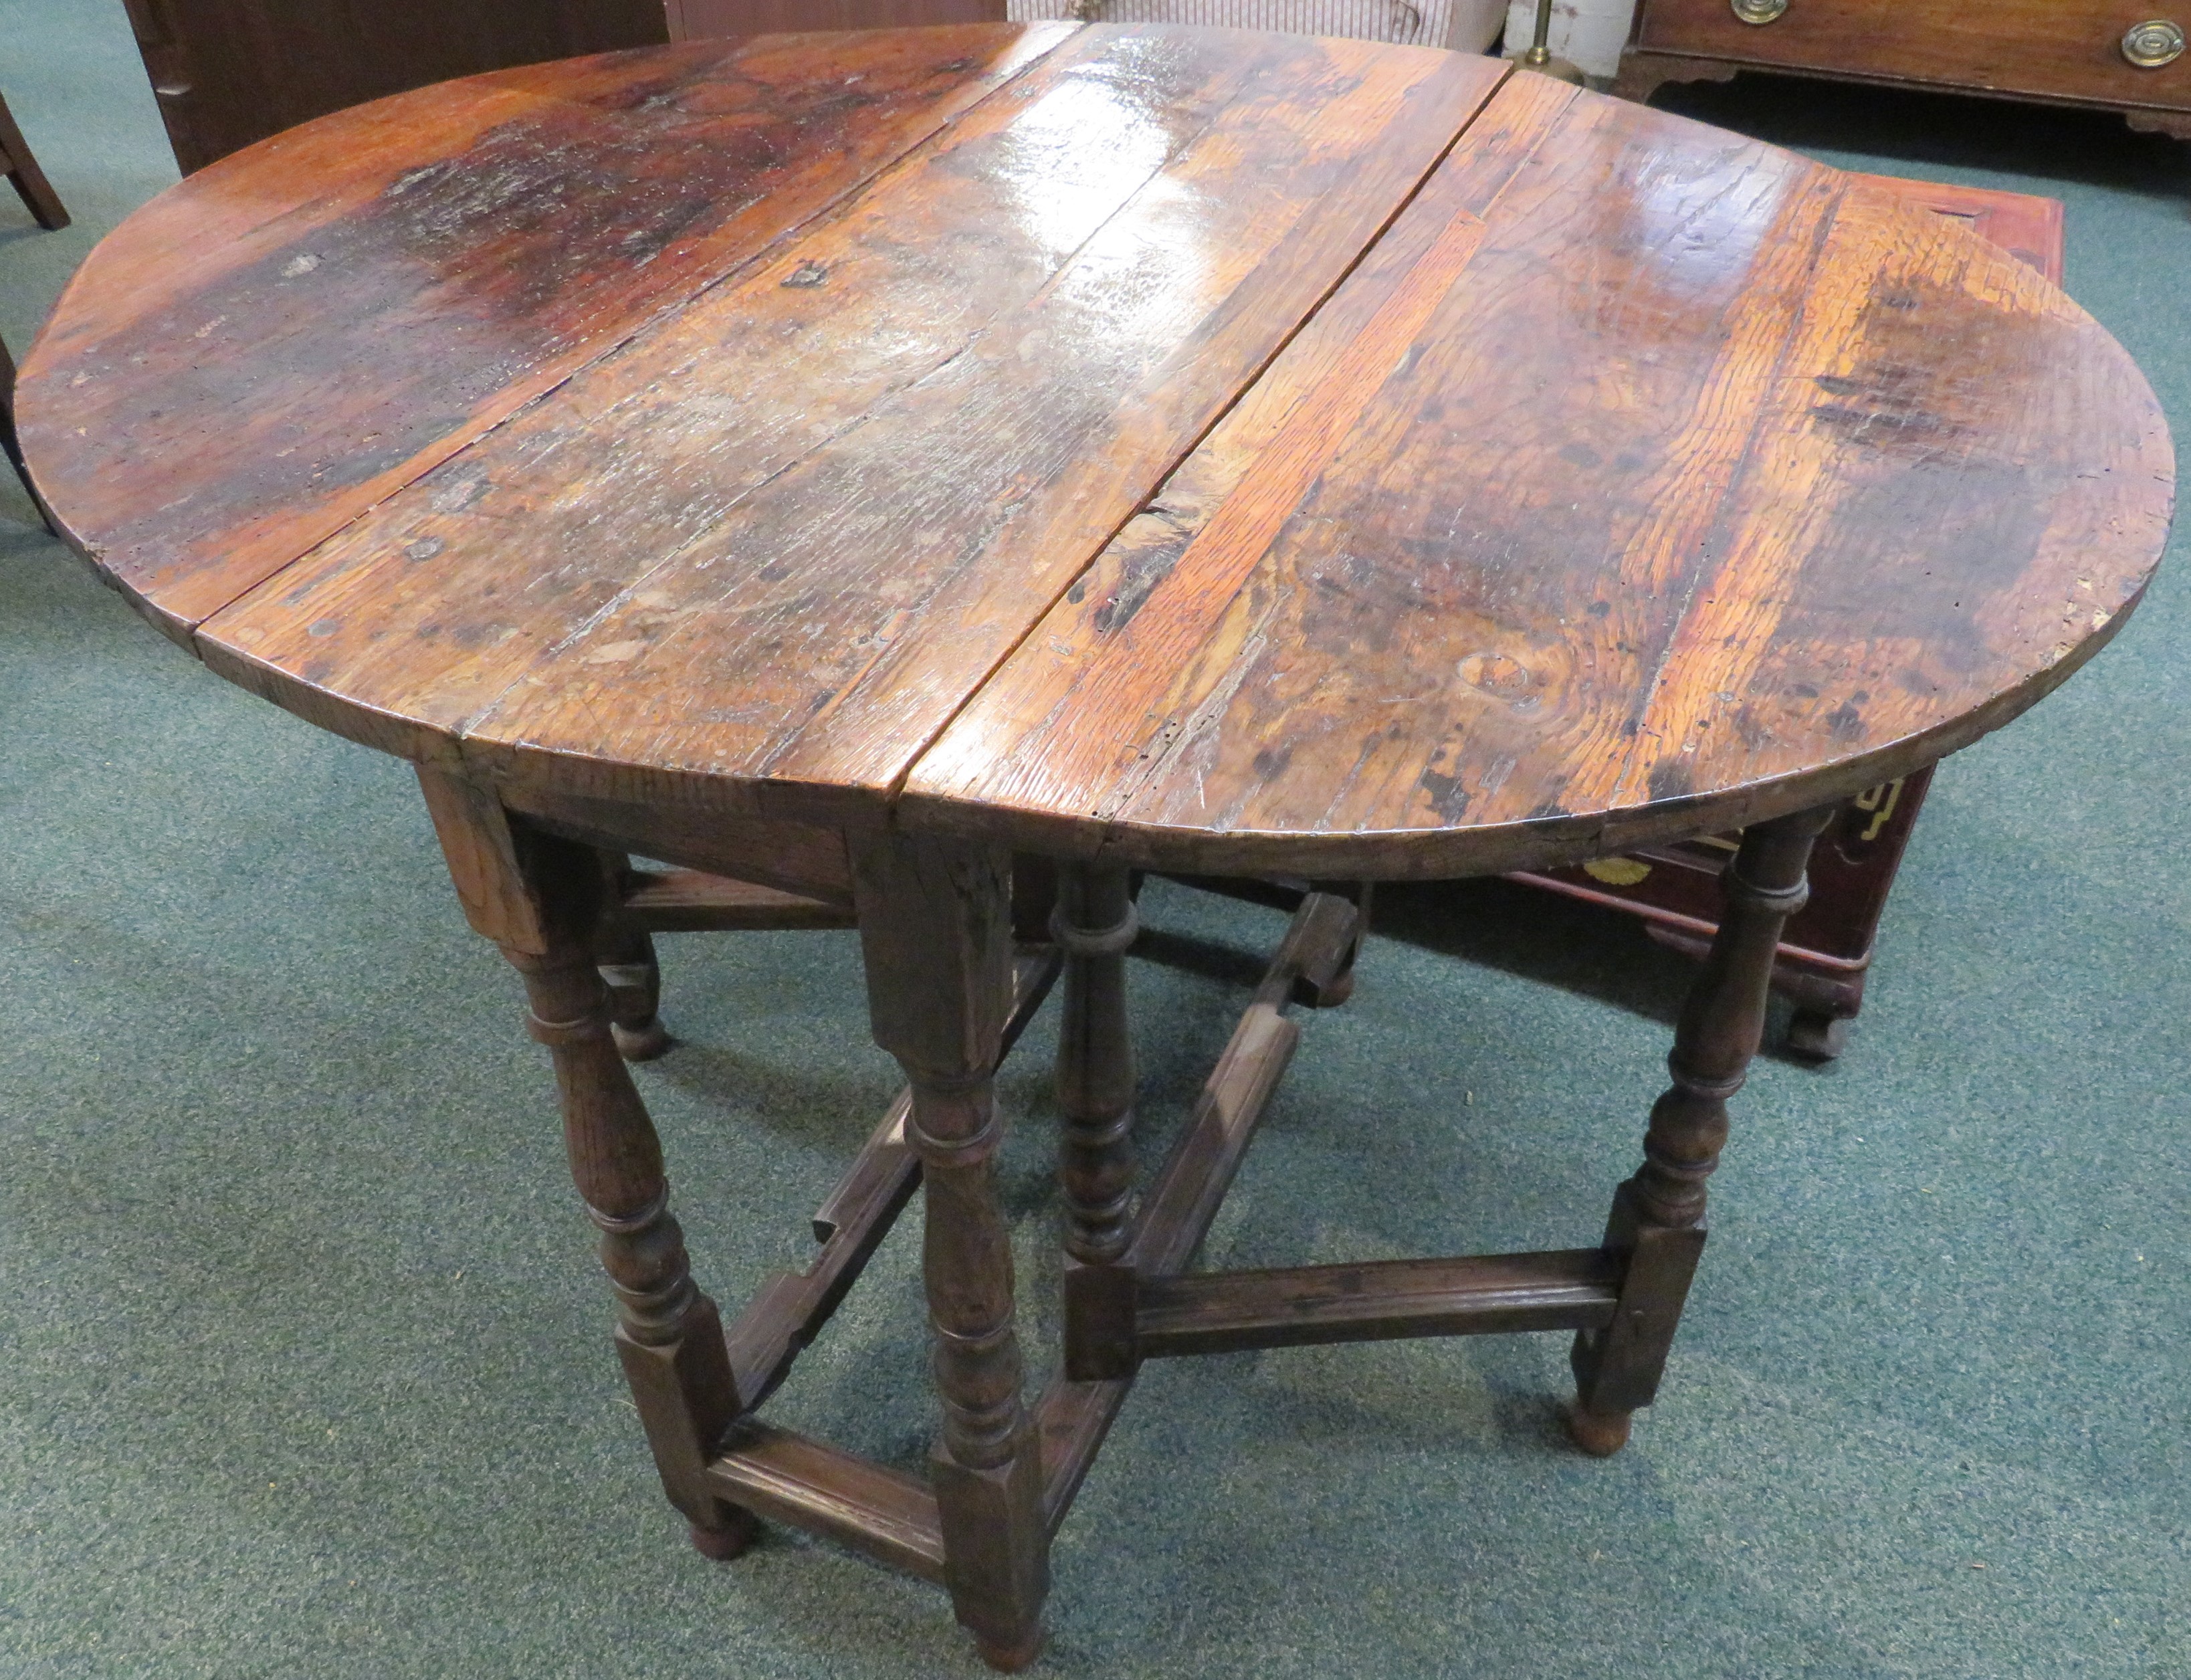 Early 19th century oak oval gate-leg side table, dowel joins, dimensions extended height 69cm, width